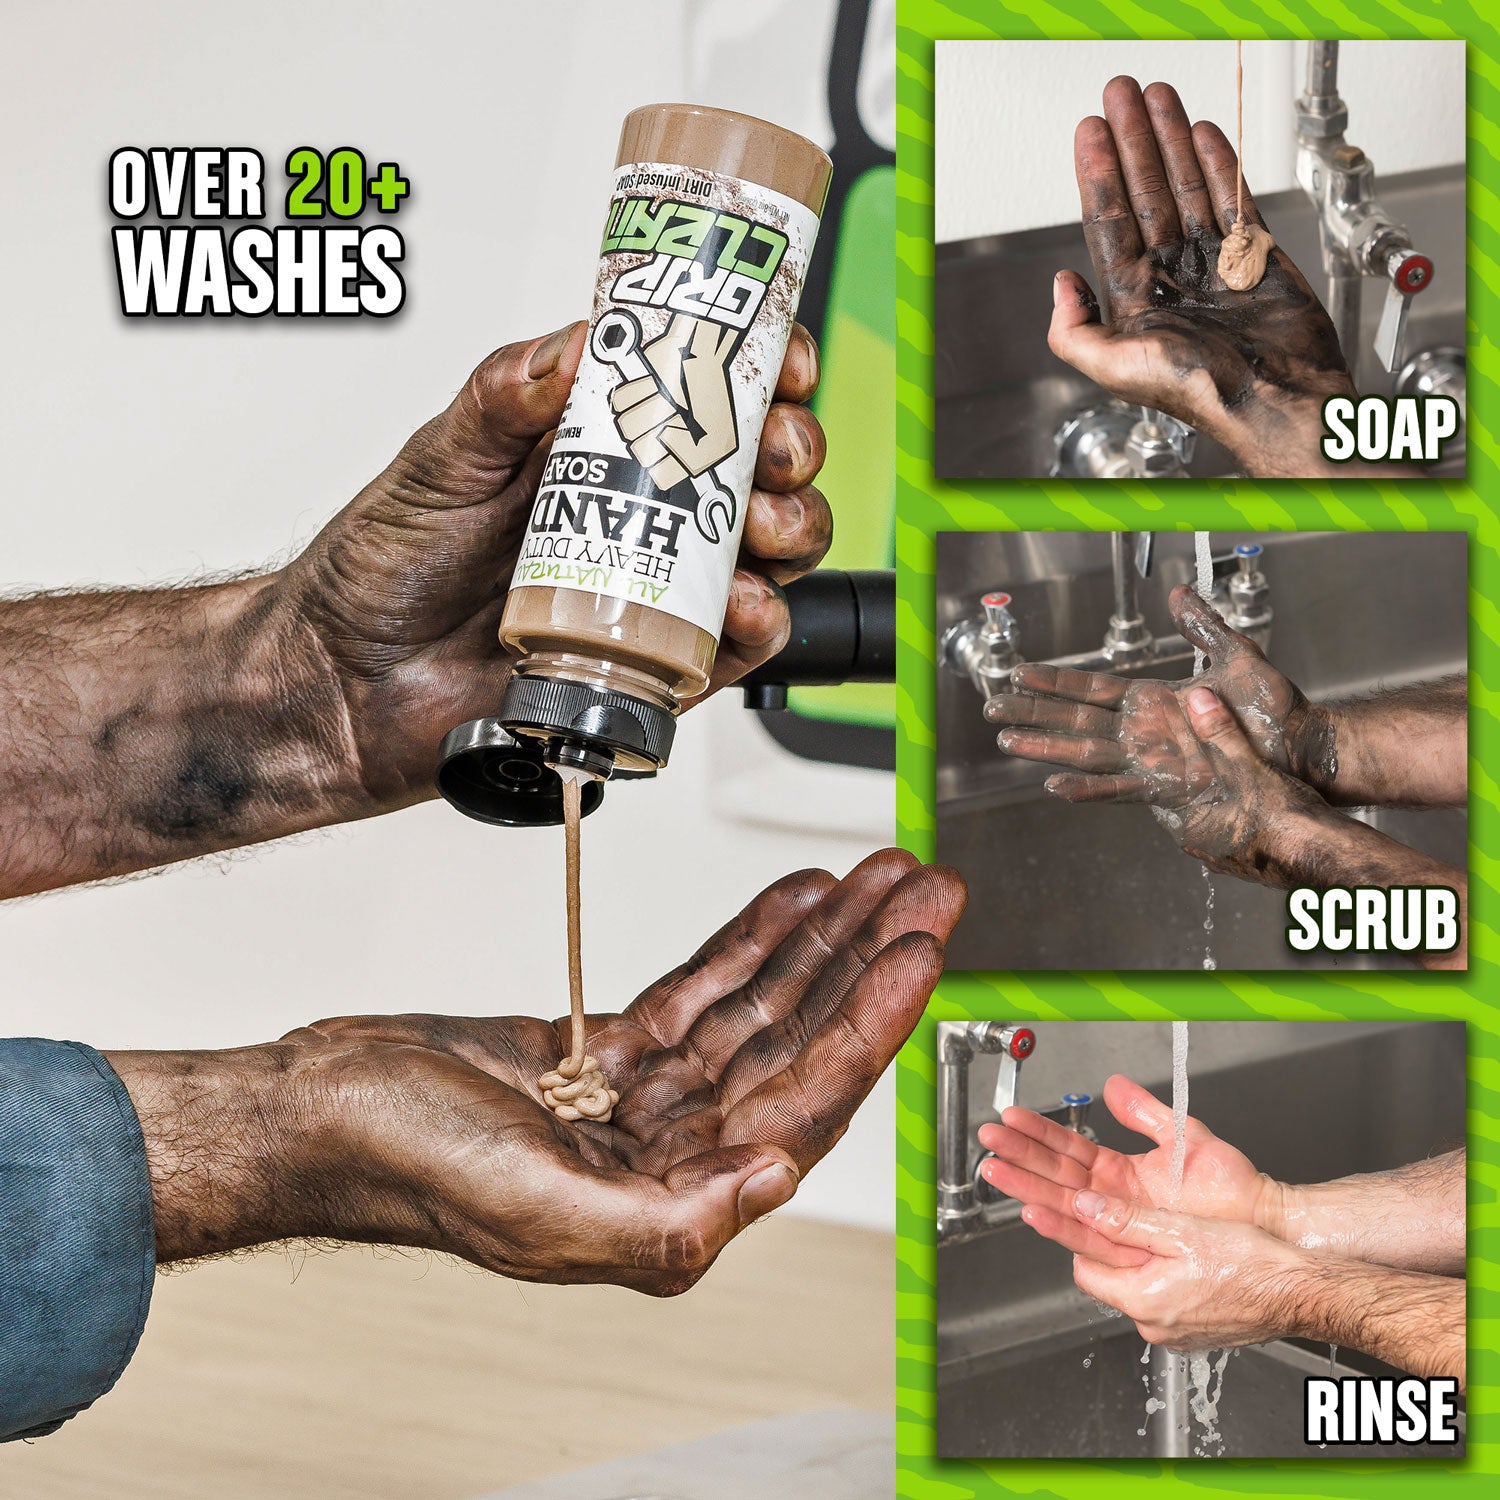 Grip Clean Hand & Tool Wipes